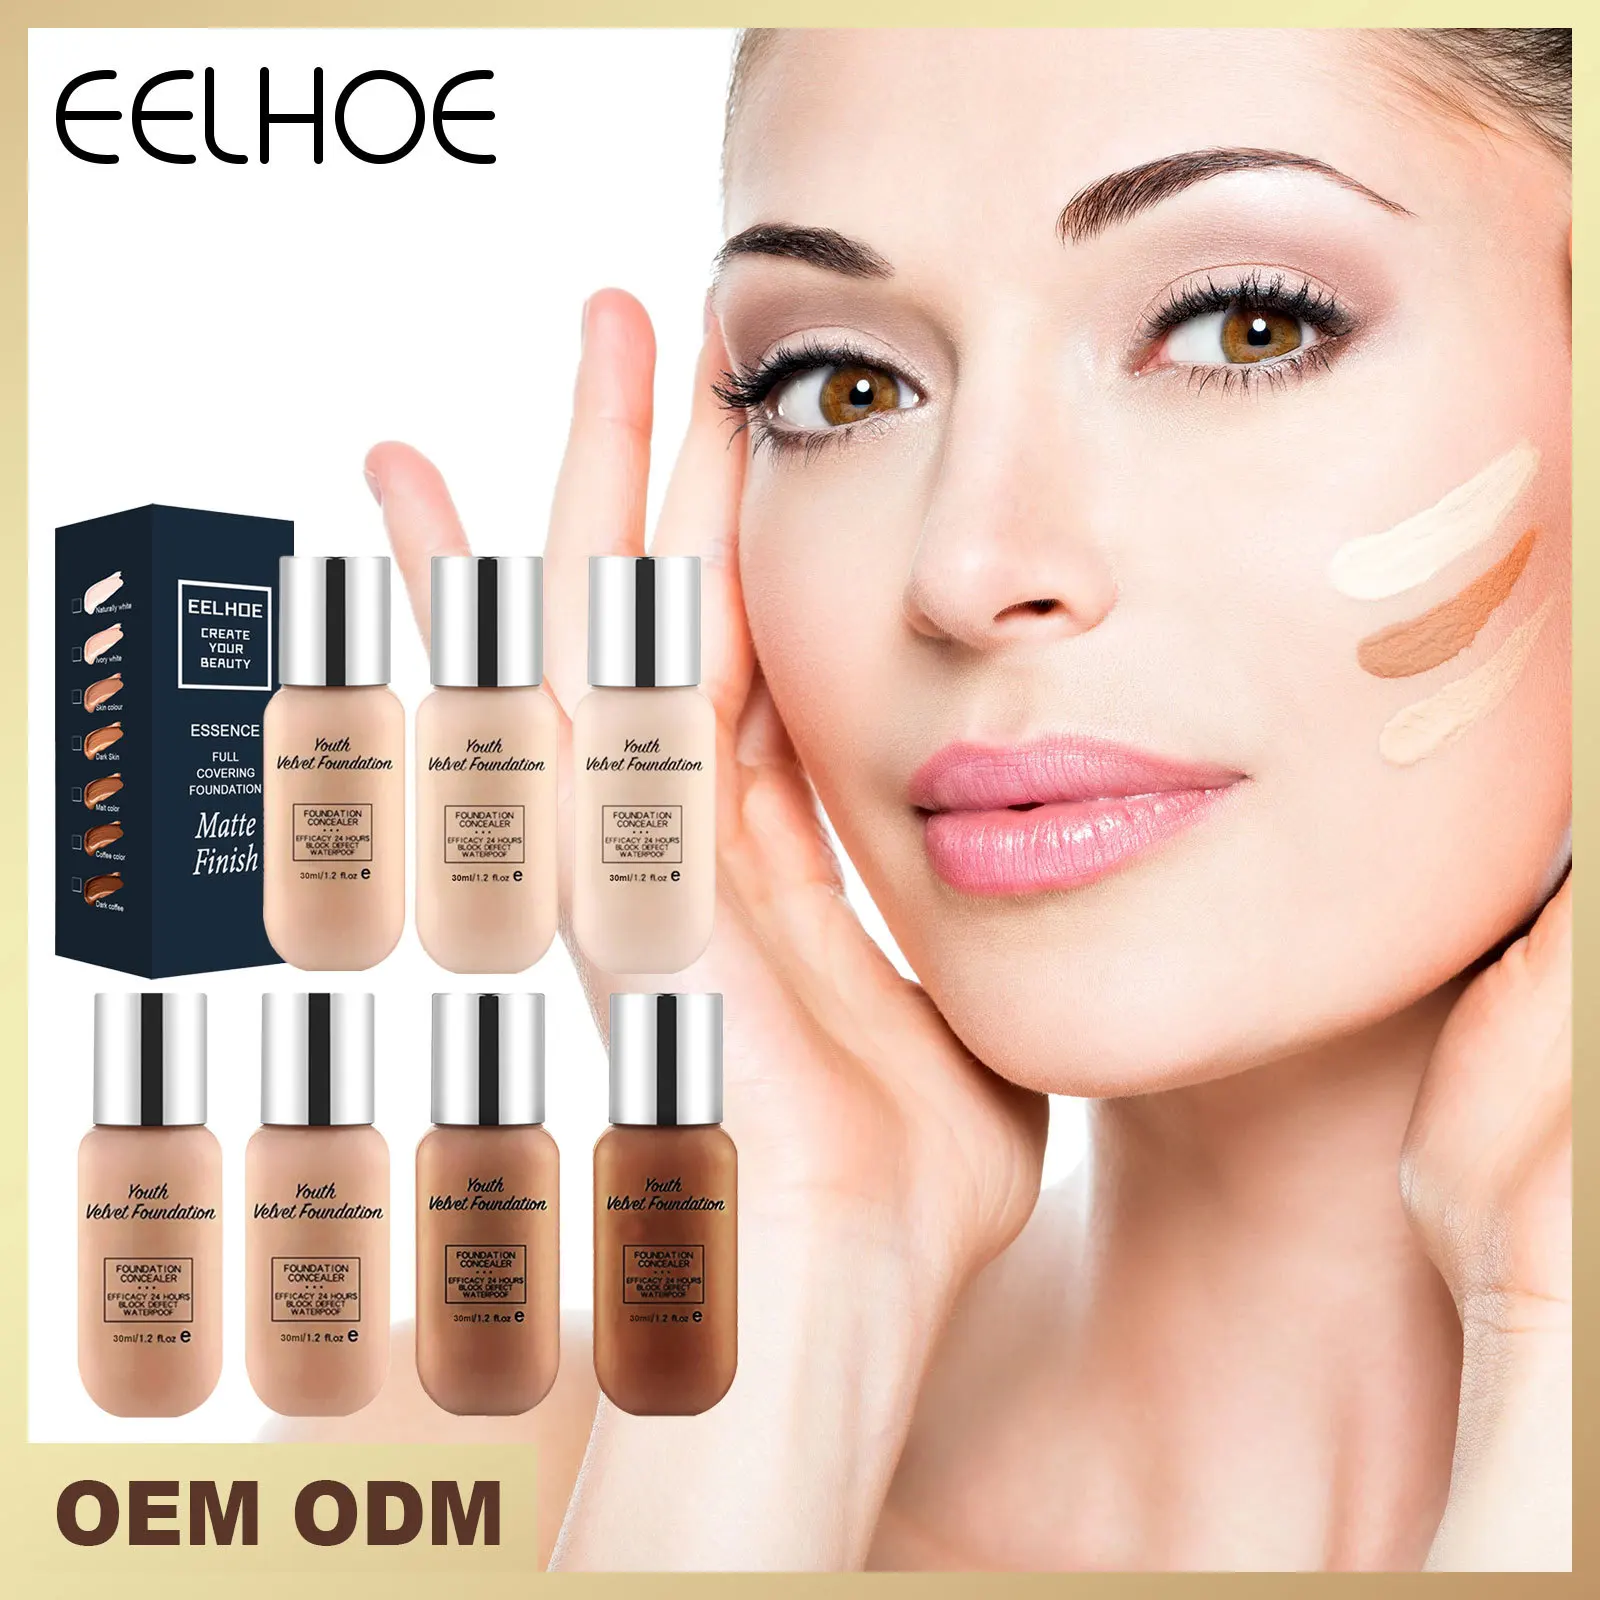 

eelhoe New long-lasting Private label high definition concealer Face makeup oil free matte finish full cover liquid foundation, 7 colors